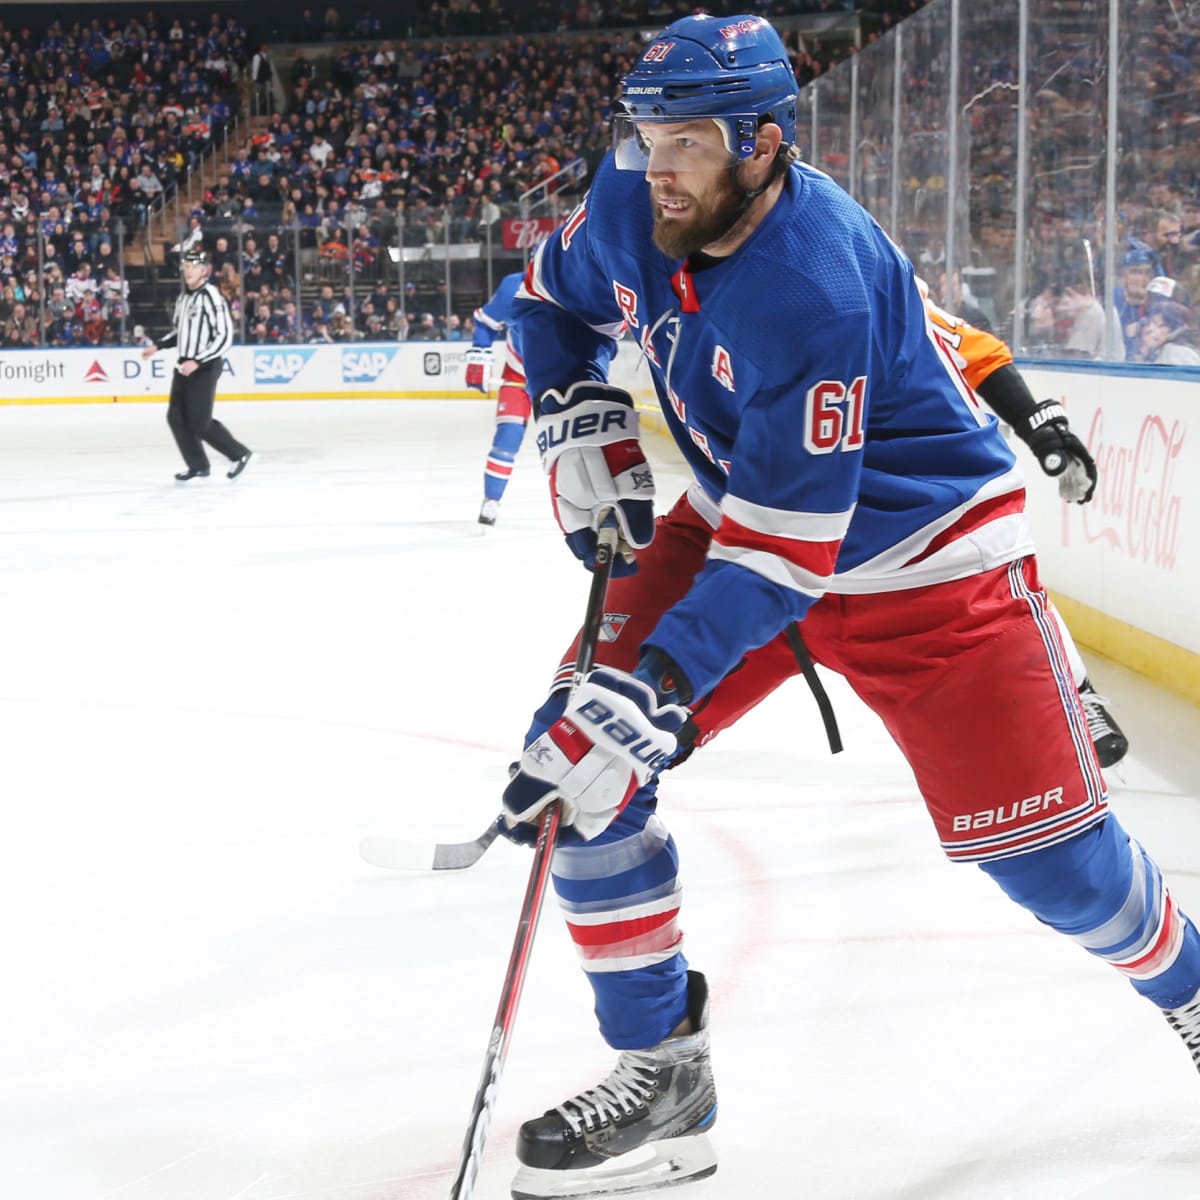 Signs point to Rick Nash making a difference with Rangers - Newsday